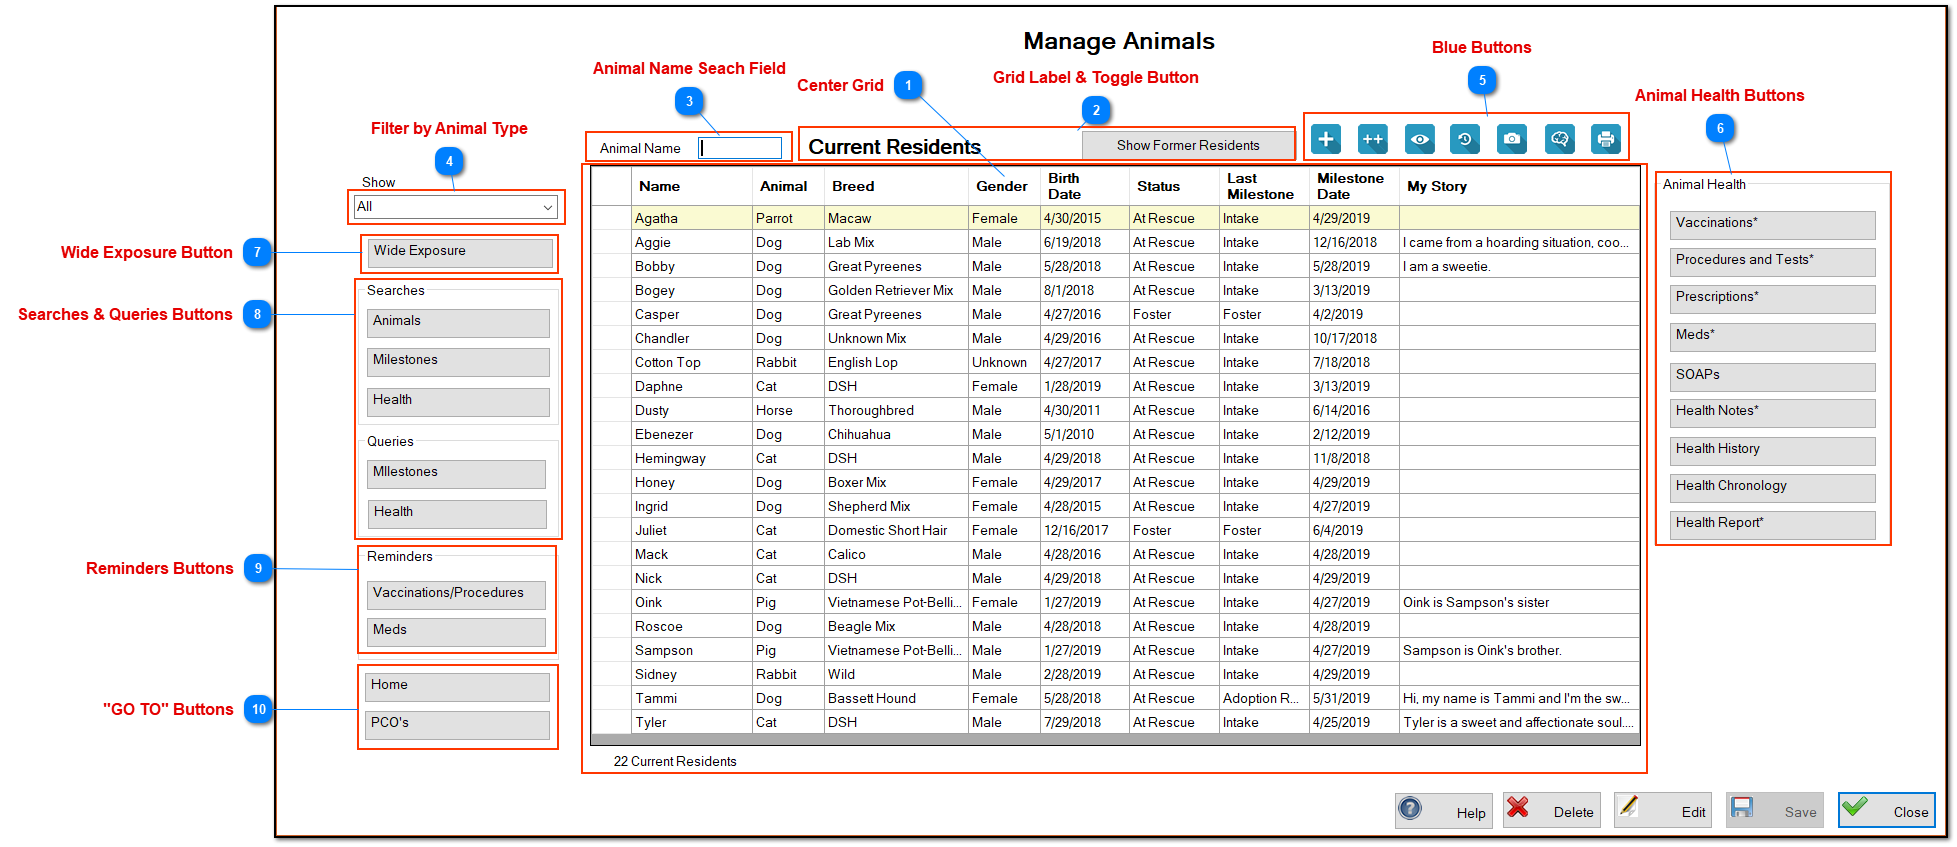 Exploring the Manage Animals Screen